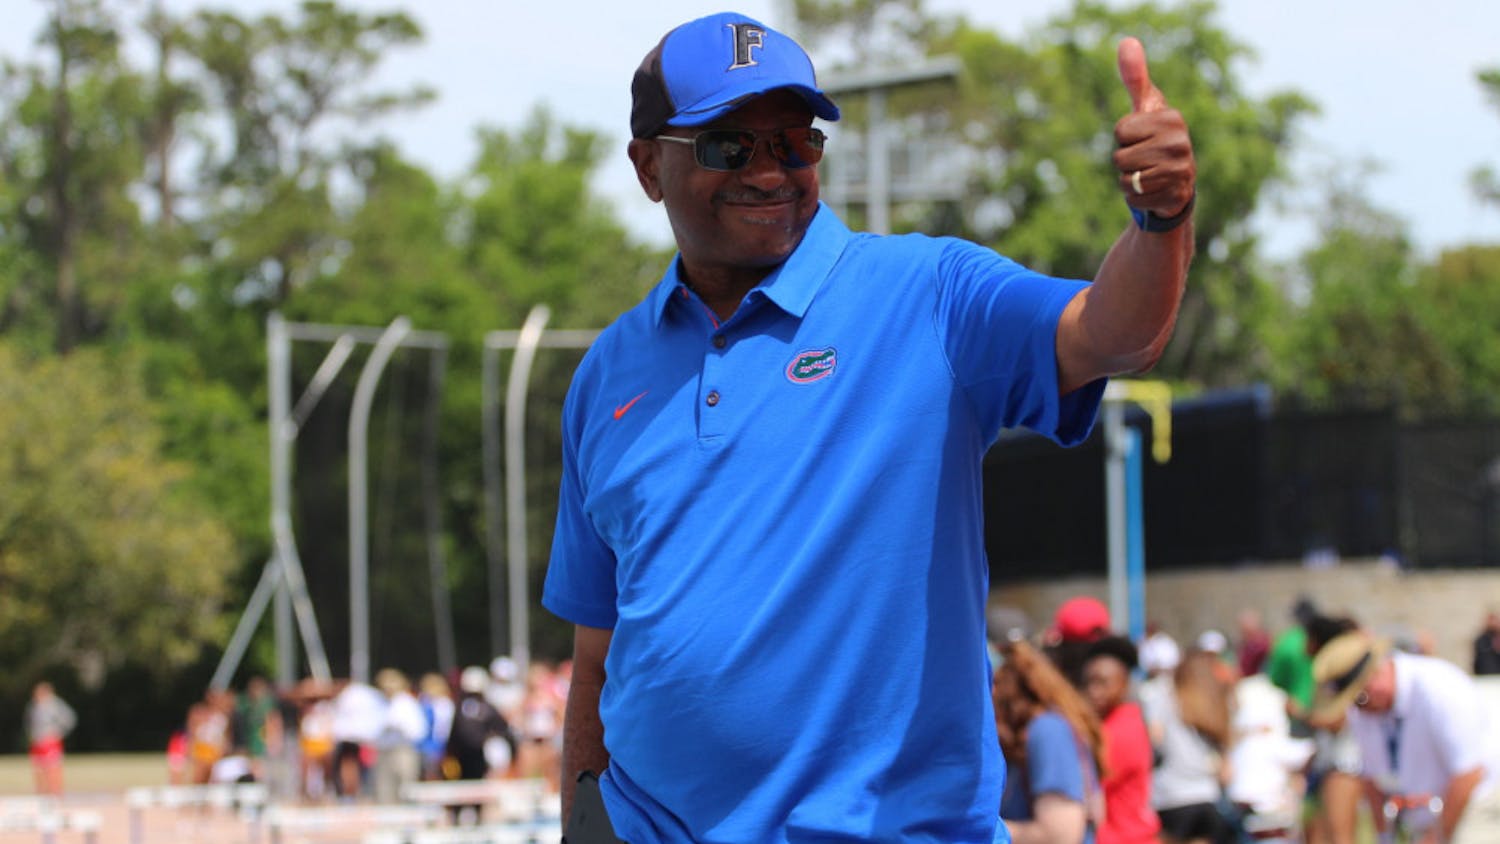 UF track and field coach Mike Holloway. The Gators had 10 athletes bring home hardware from the SEC Outdoor Championships.